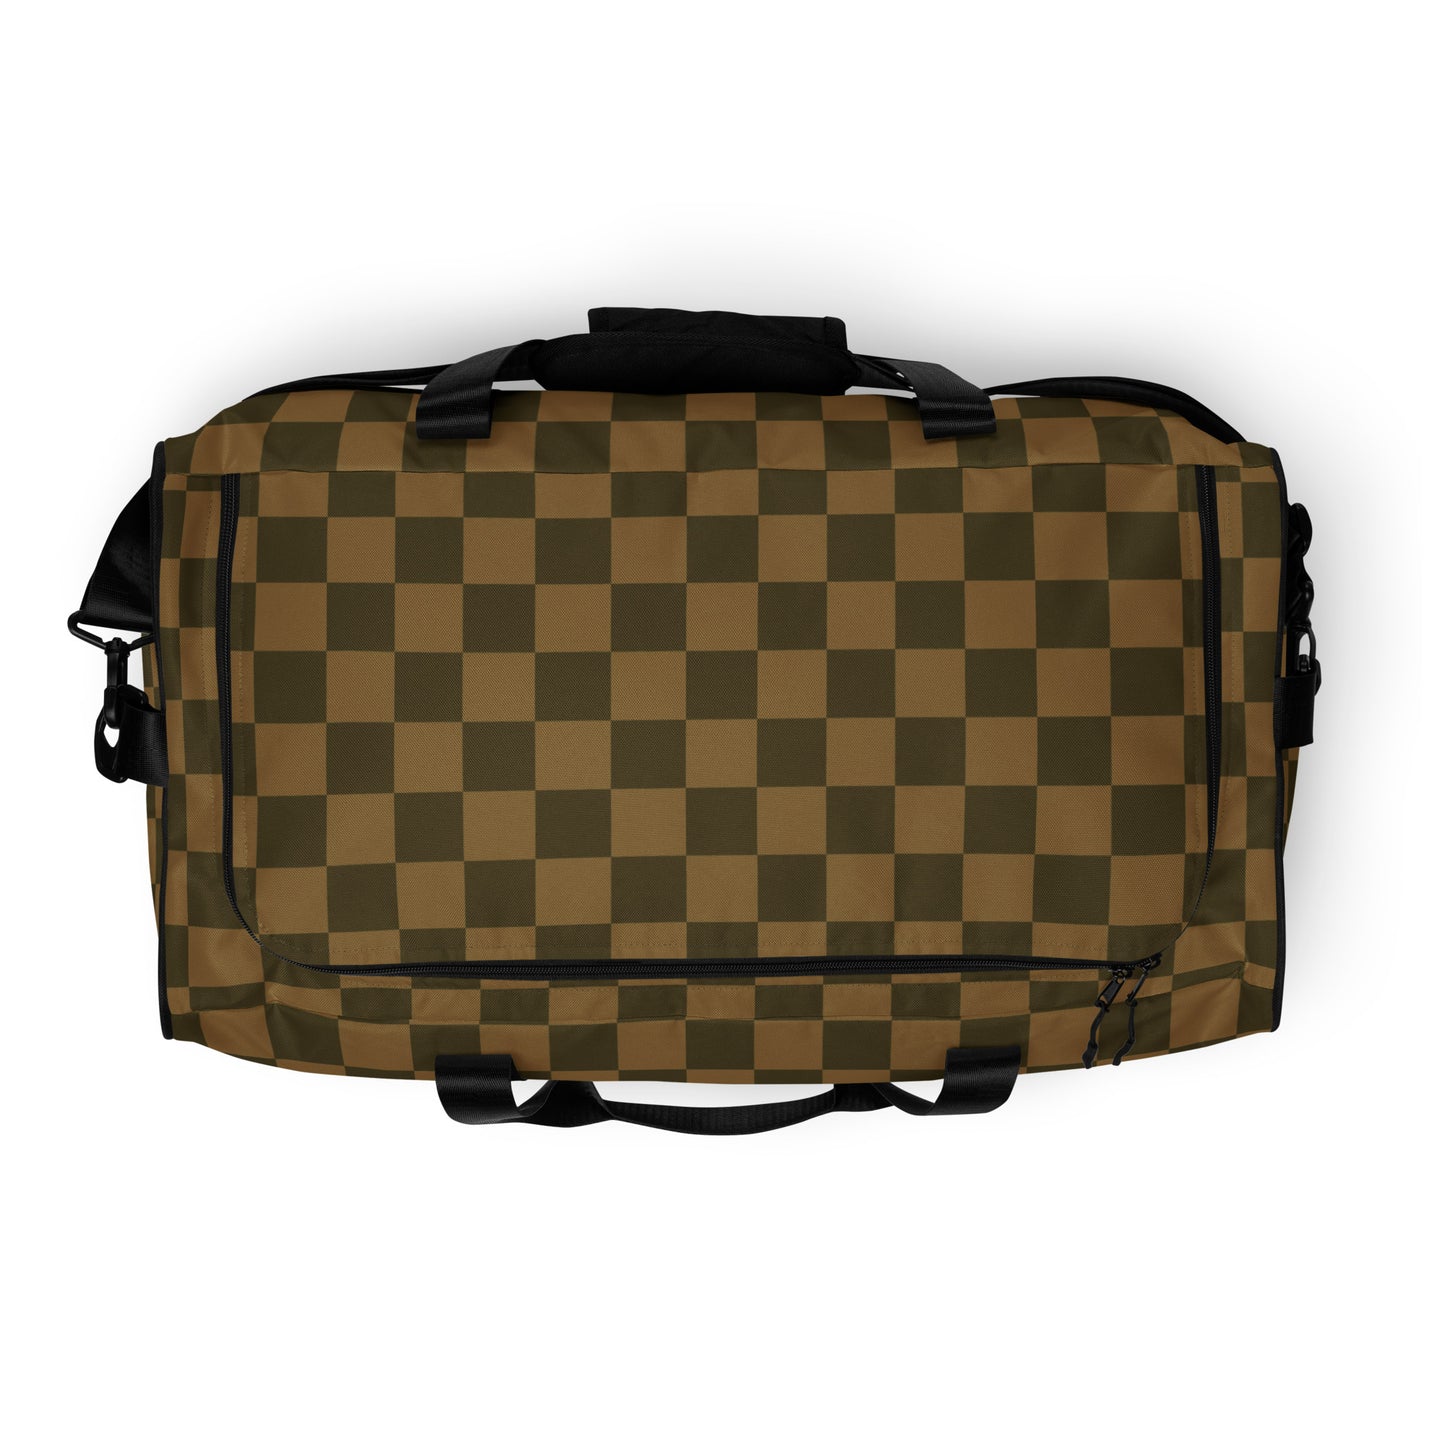 Wempy Dyocta Koto Signature Casual - Sustainably Made Duffle Bag